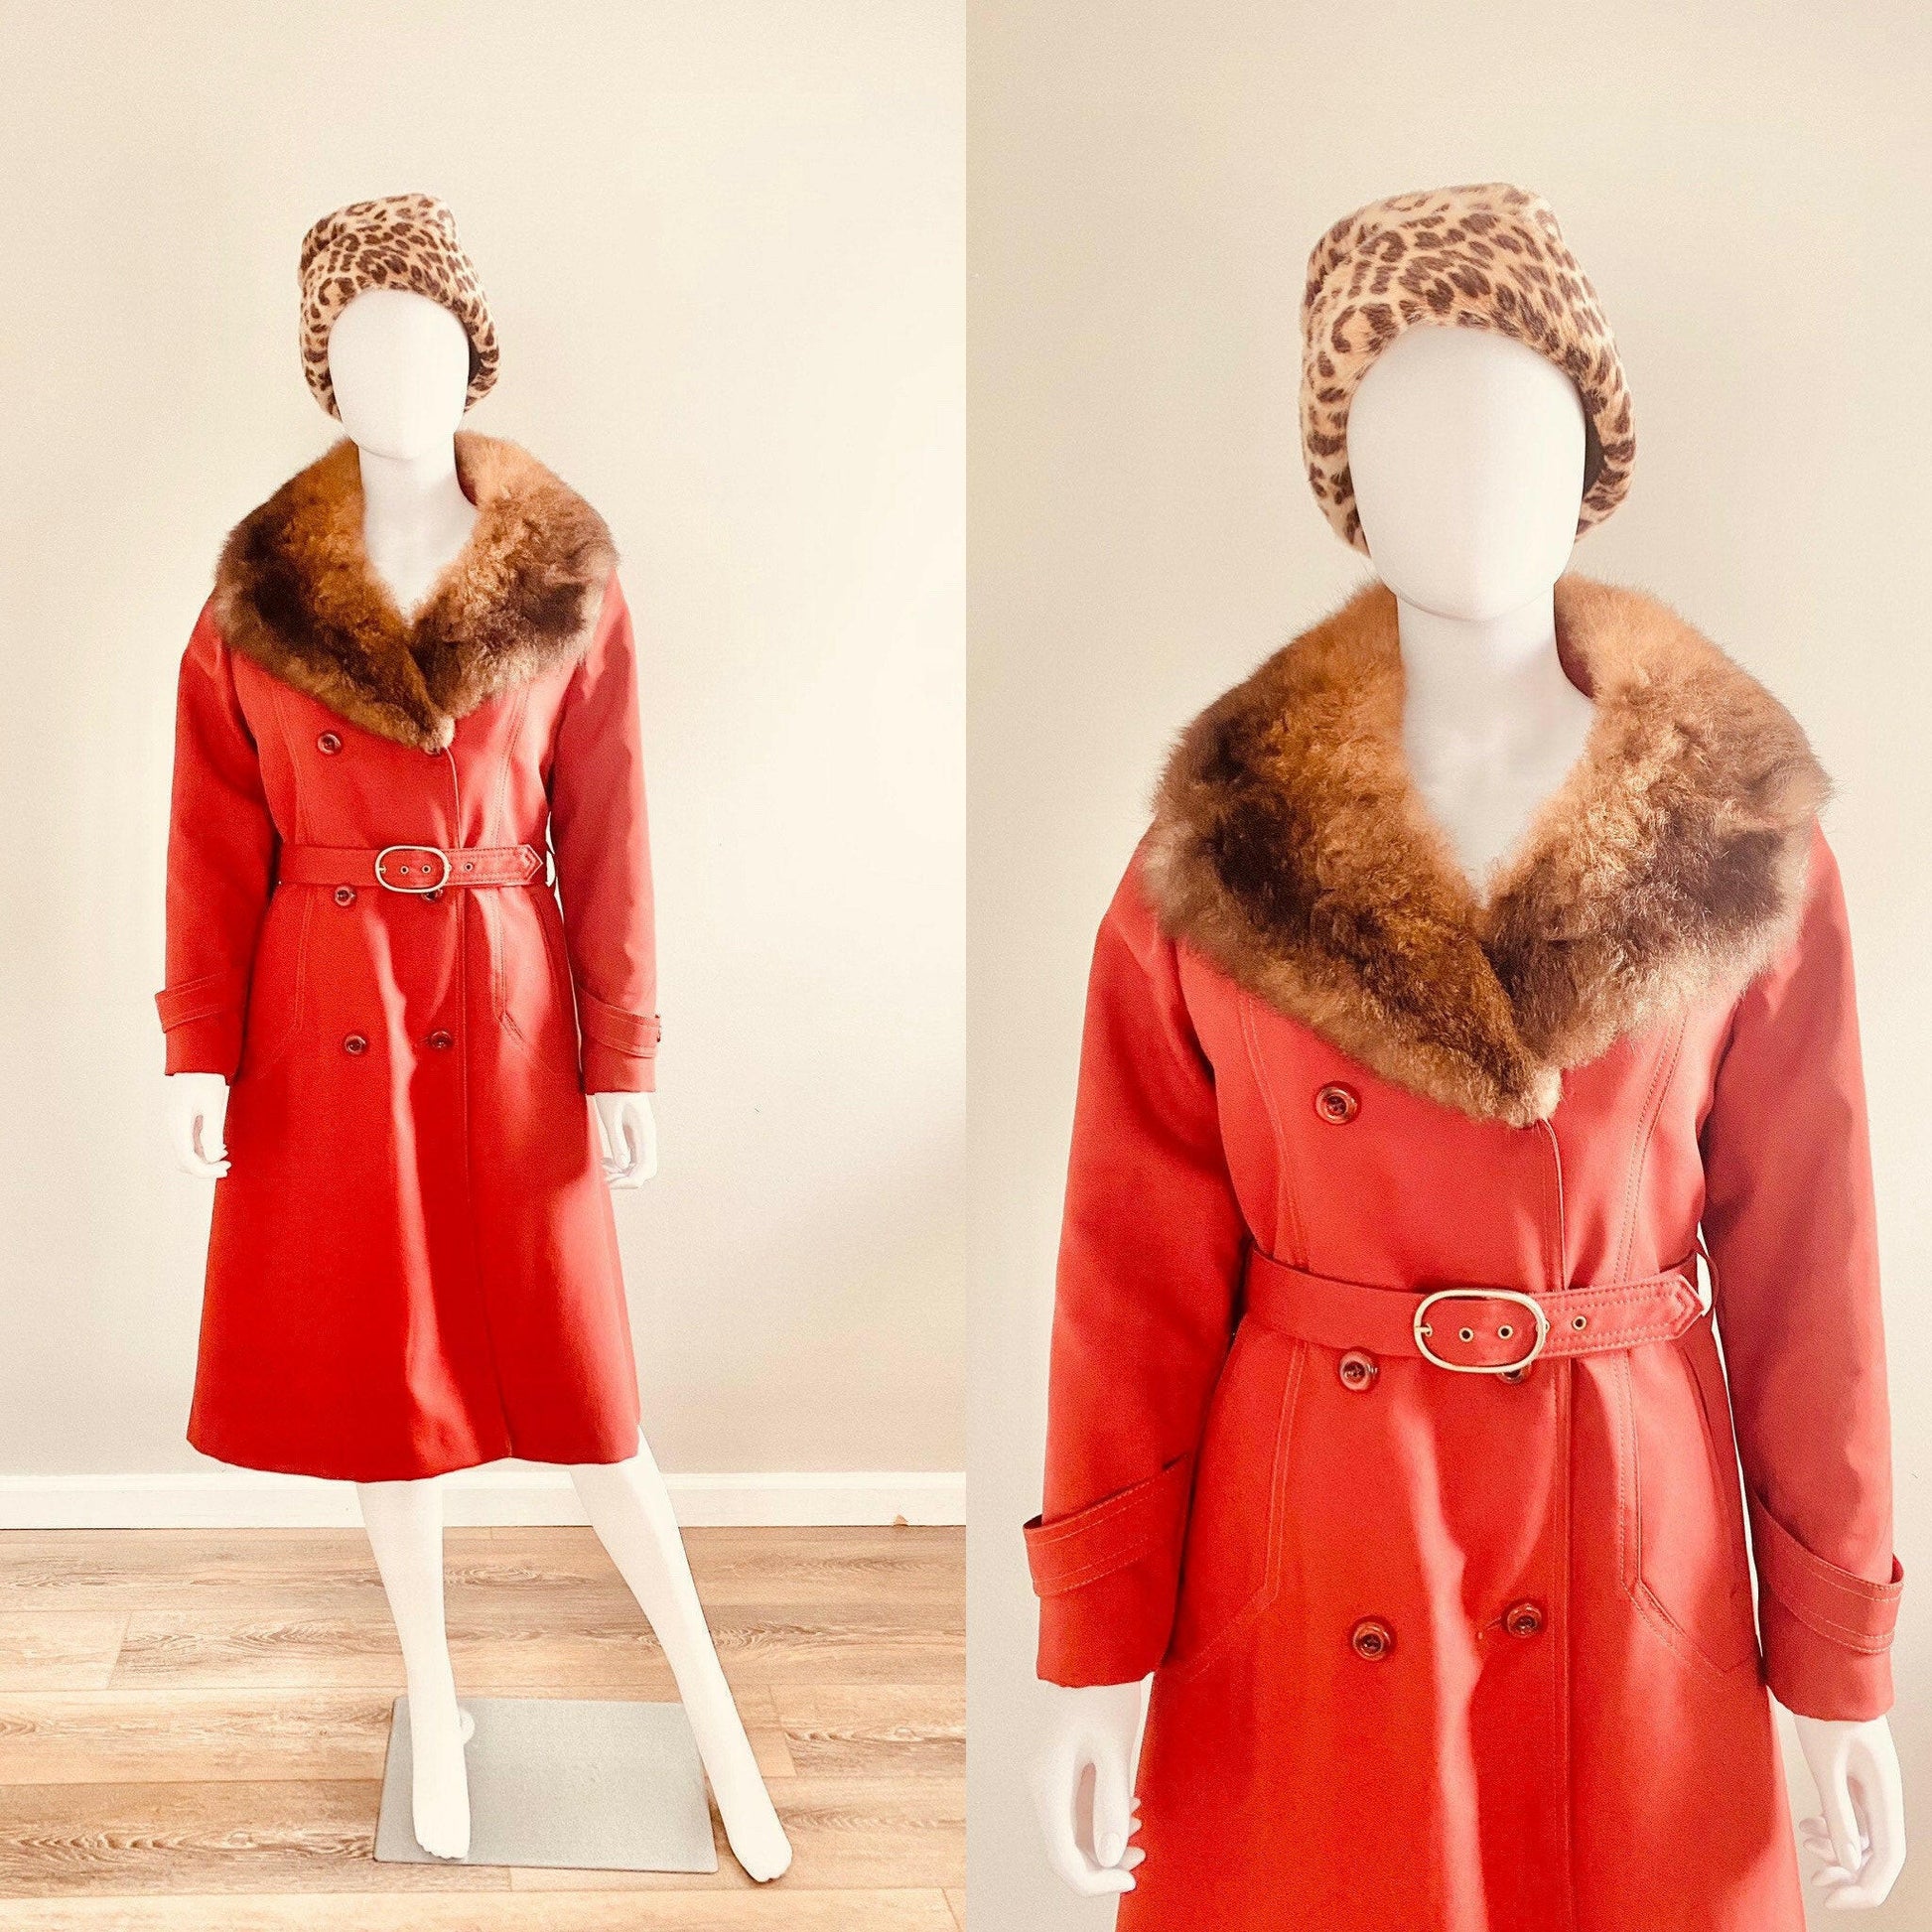 Vintage 1970s Rust Trench Coat with Fur Trim / 70s winter jacket Size S